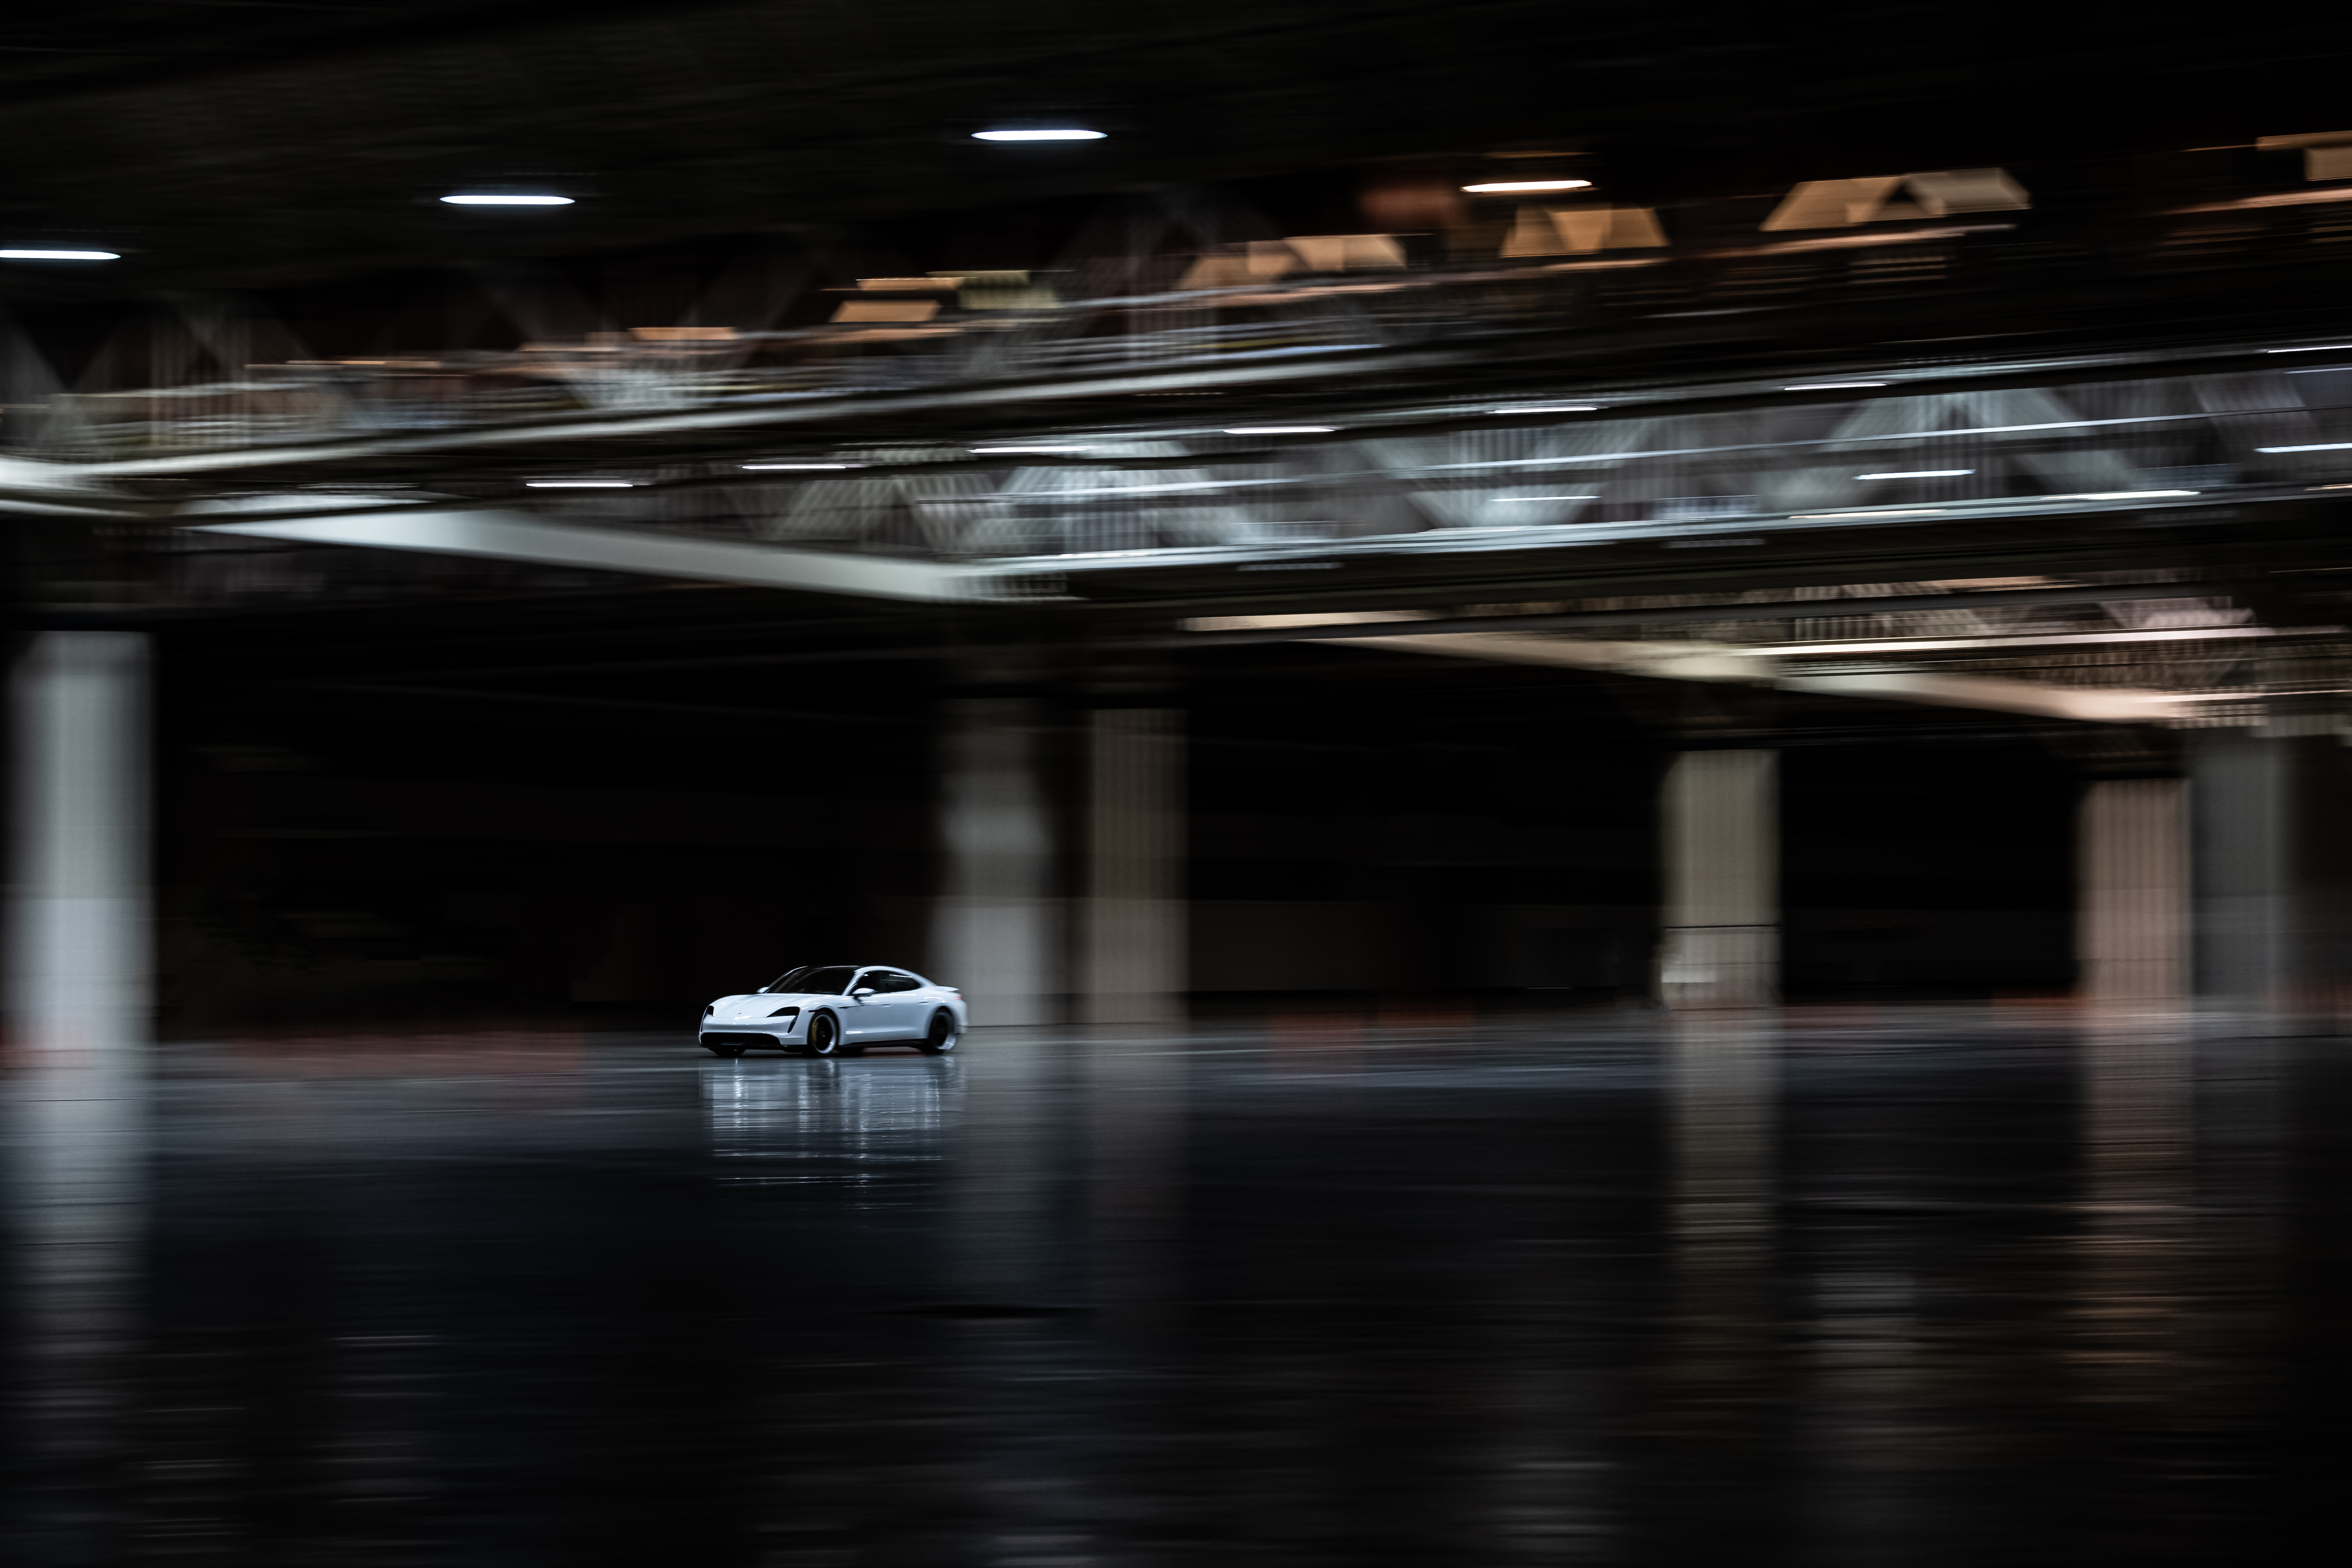 Widescreen shot of white Taycan driving in dark exhibition hall